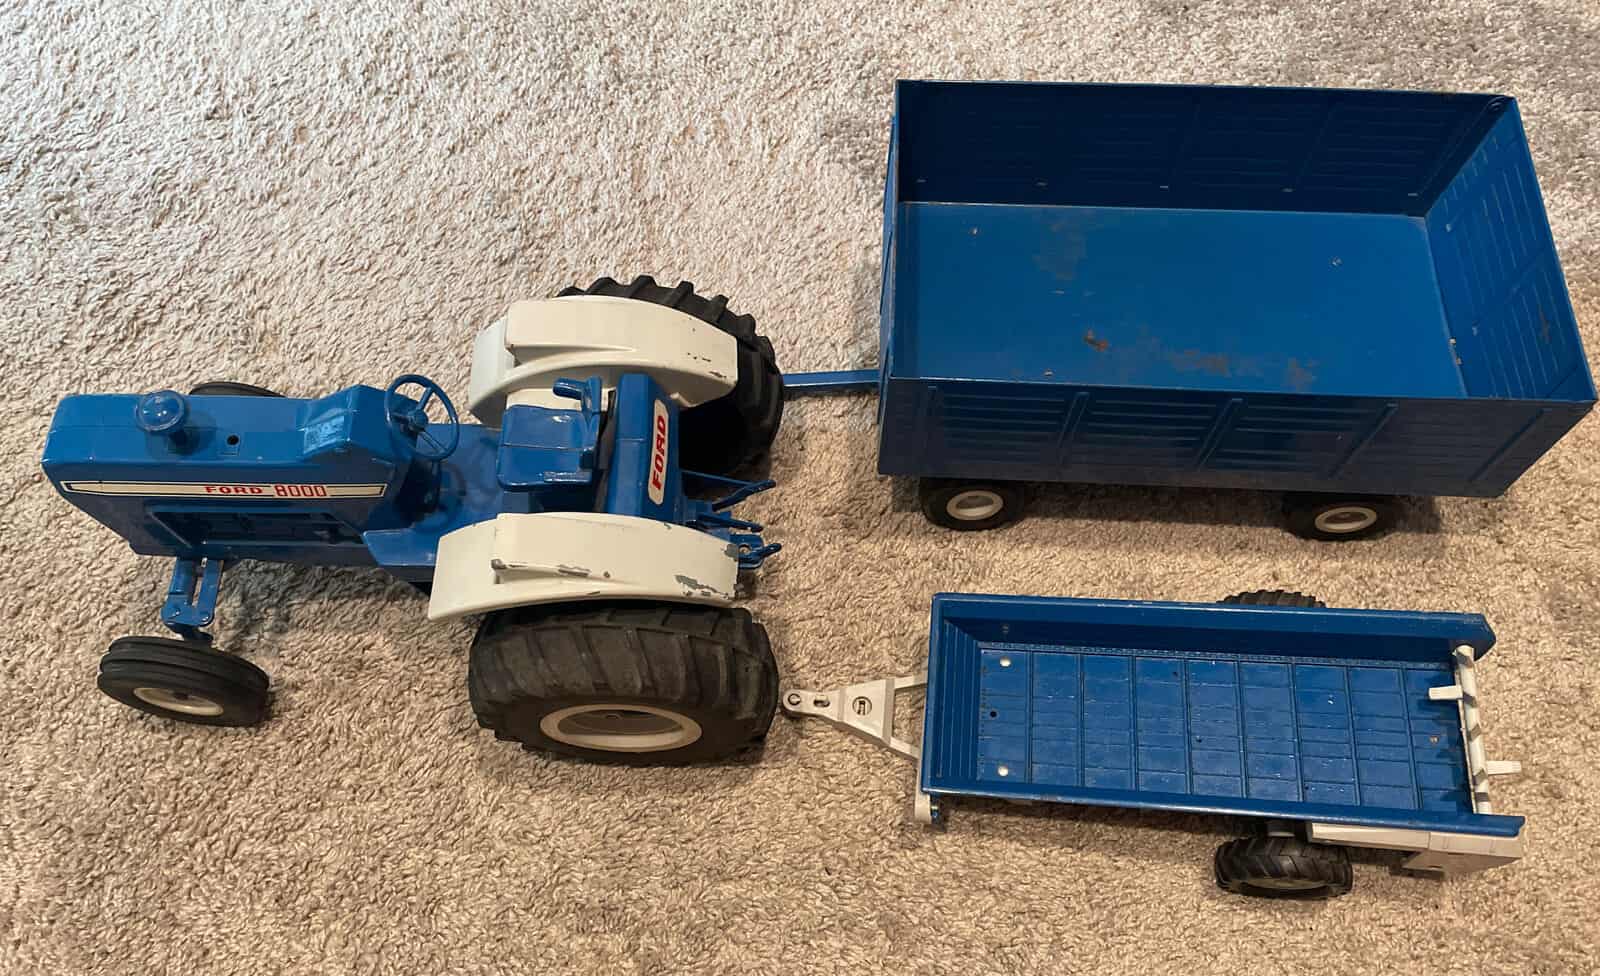 Ertl Ford 8000 Toy Tractor